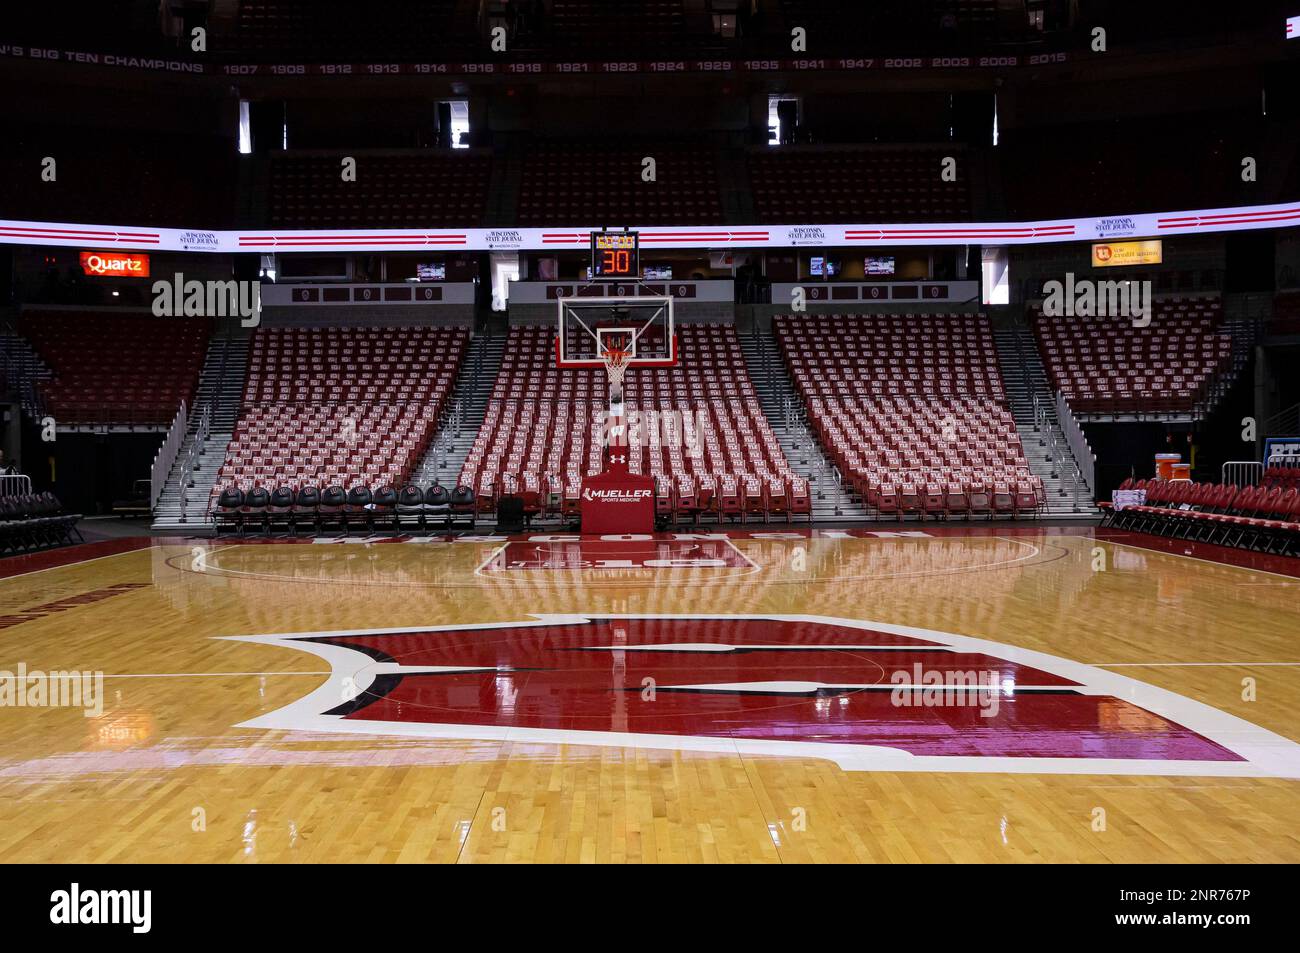 March 1, 2020: A picture of the Wisconsin basketball court looking